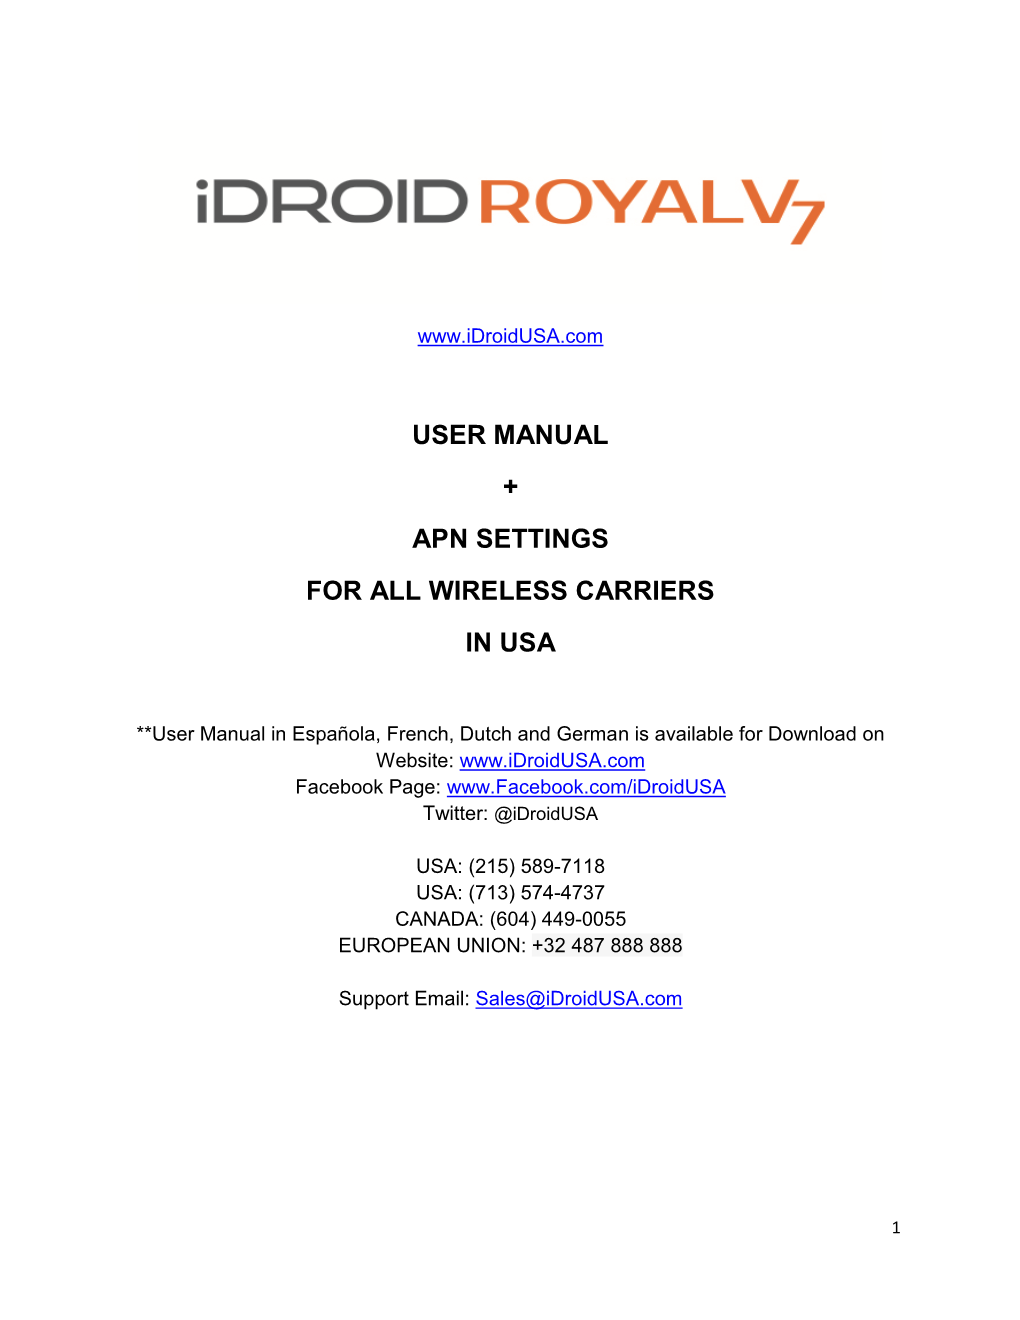 User Manual + Apn Settings for All Wireless Carriers in Usa